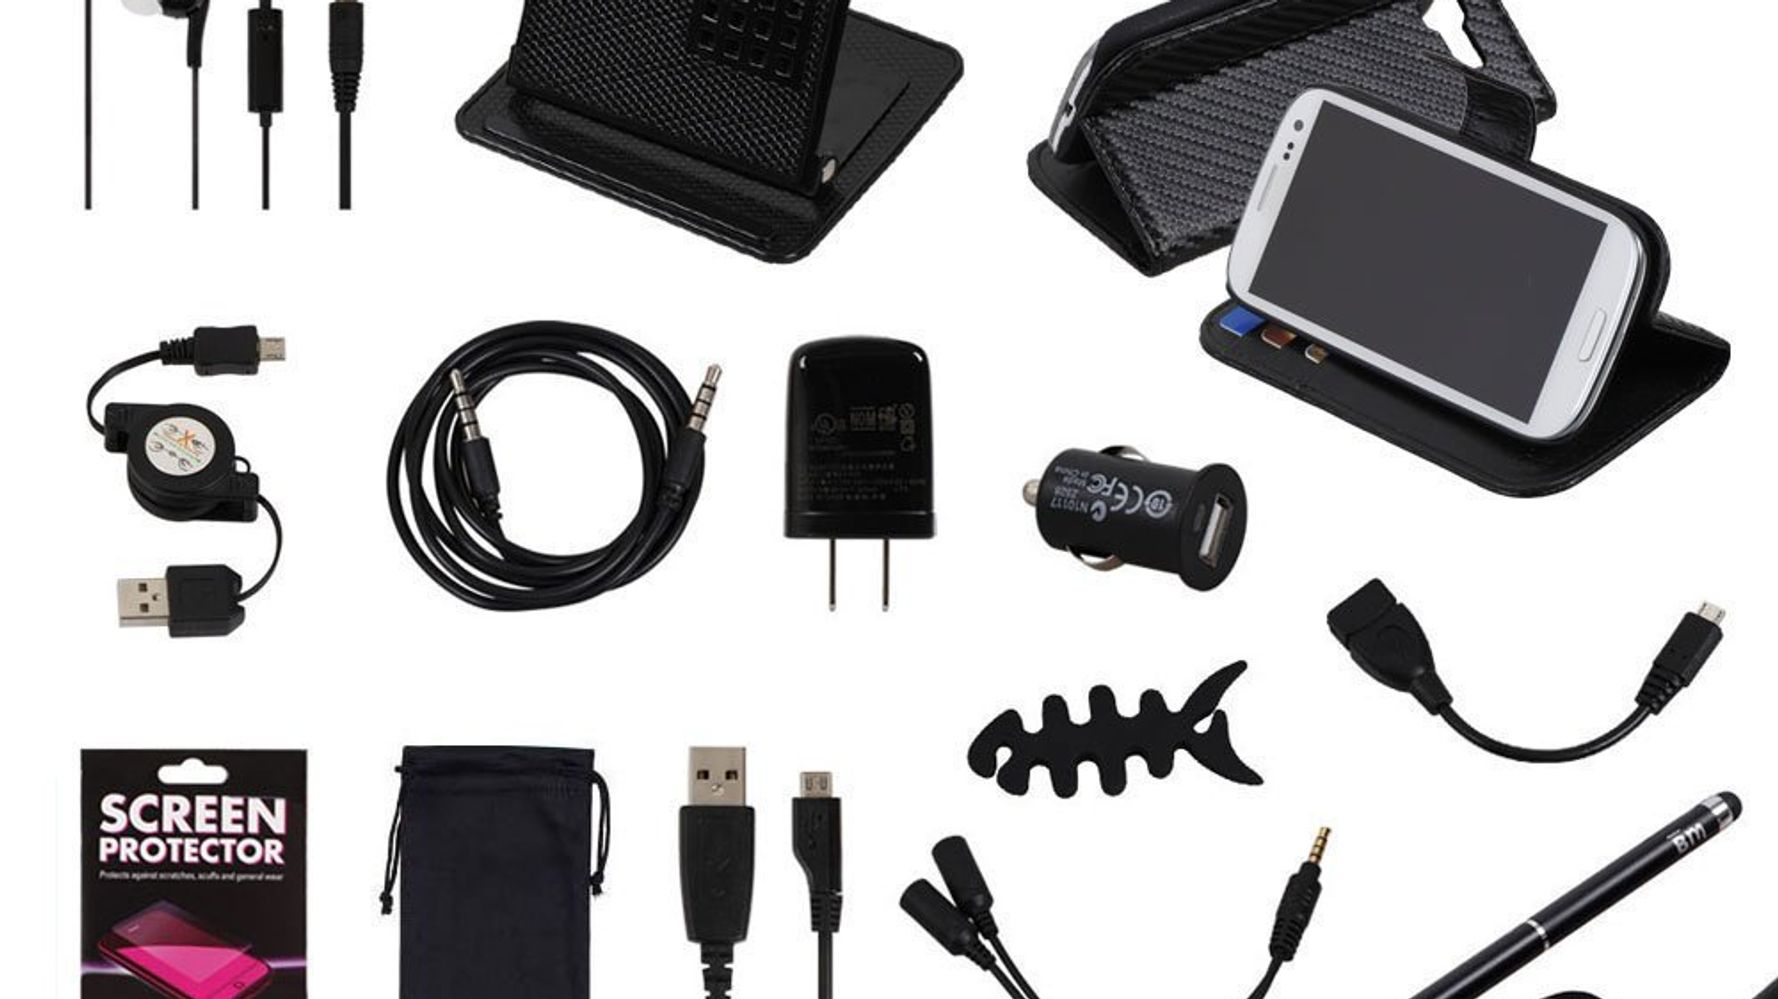 Invest Your Money Buying Reliable Mobile Phone Accessories